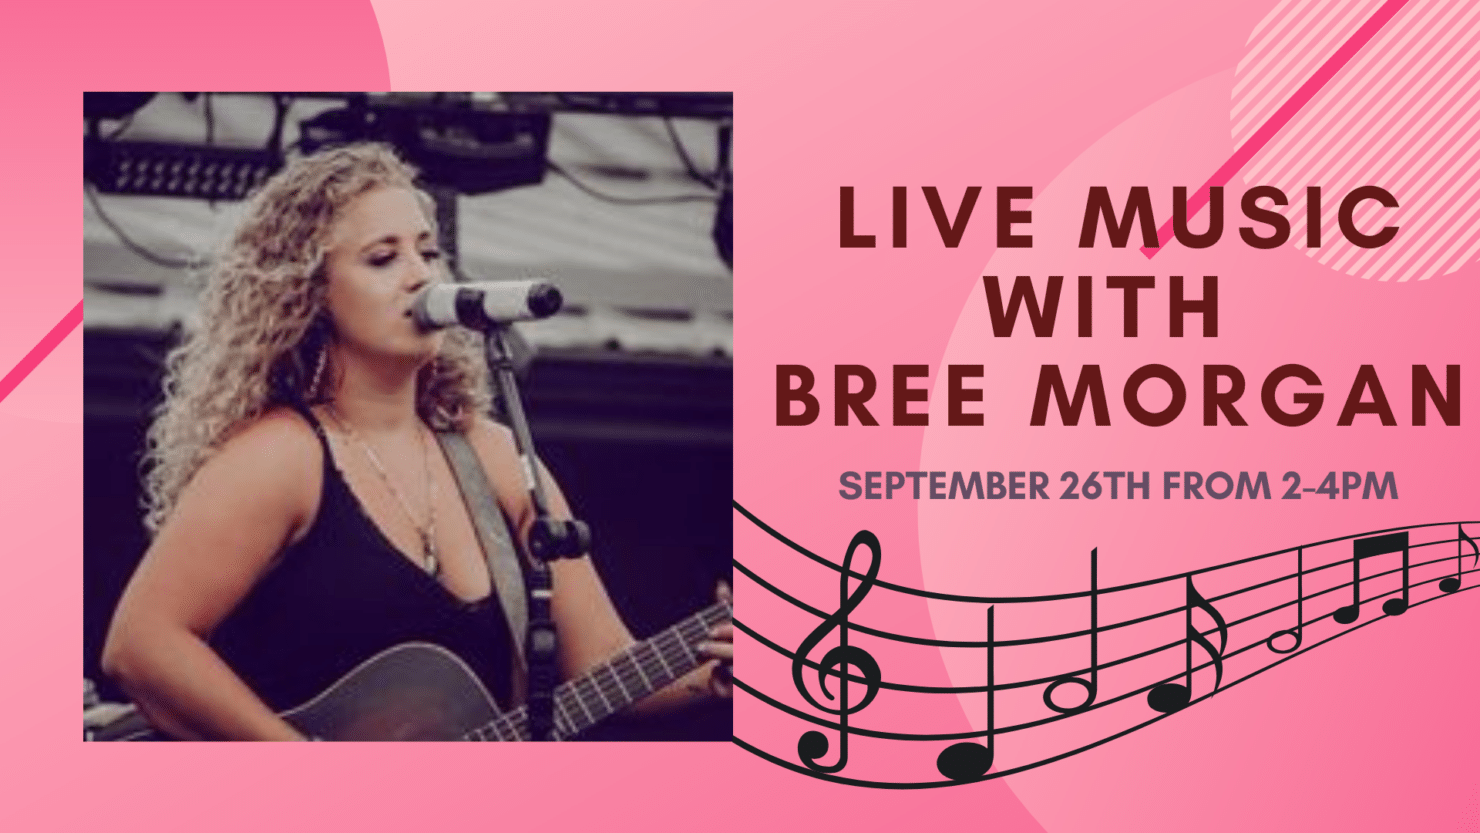 Live music with Bree Morgan